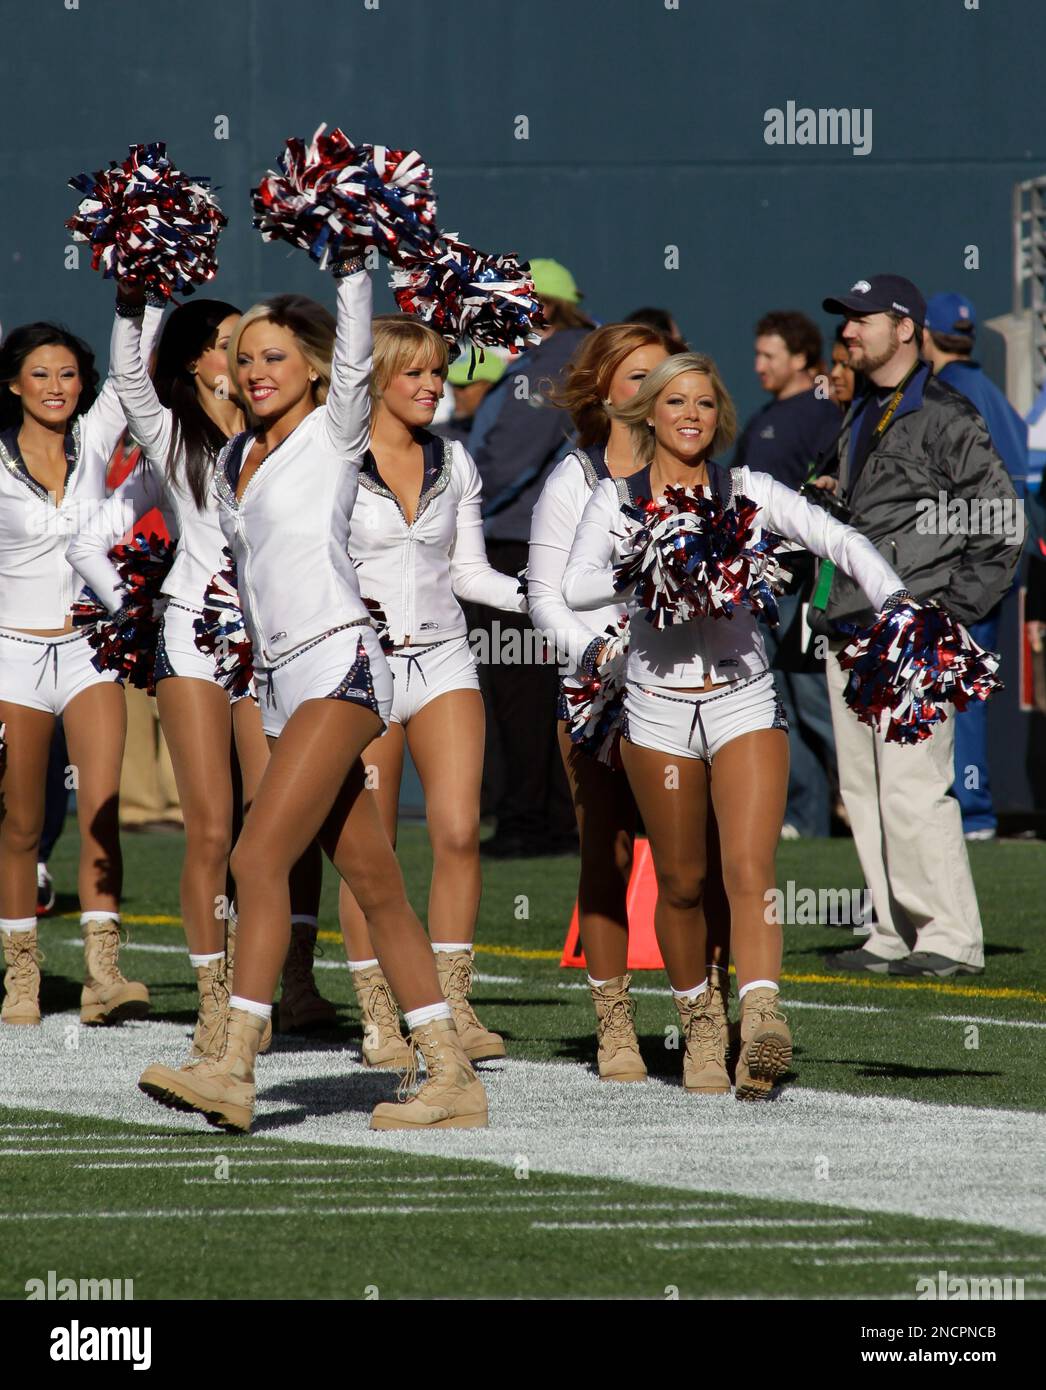 The Sea Gals cheerleades wear combat boots in honor of veterns before the  Seattle Seahawks against the New York Giants NFL football game, Sunday,  Nov. 7, 2010, in Seattle. (AP Photo/Ted S.